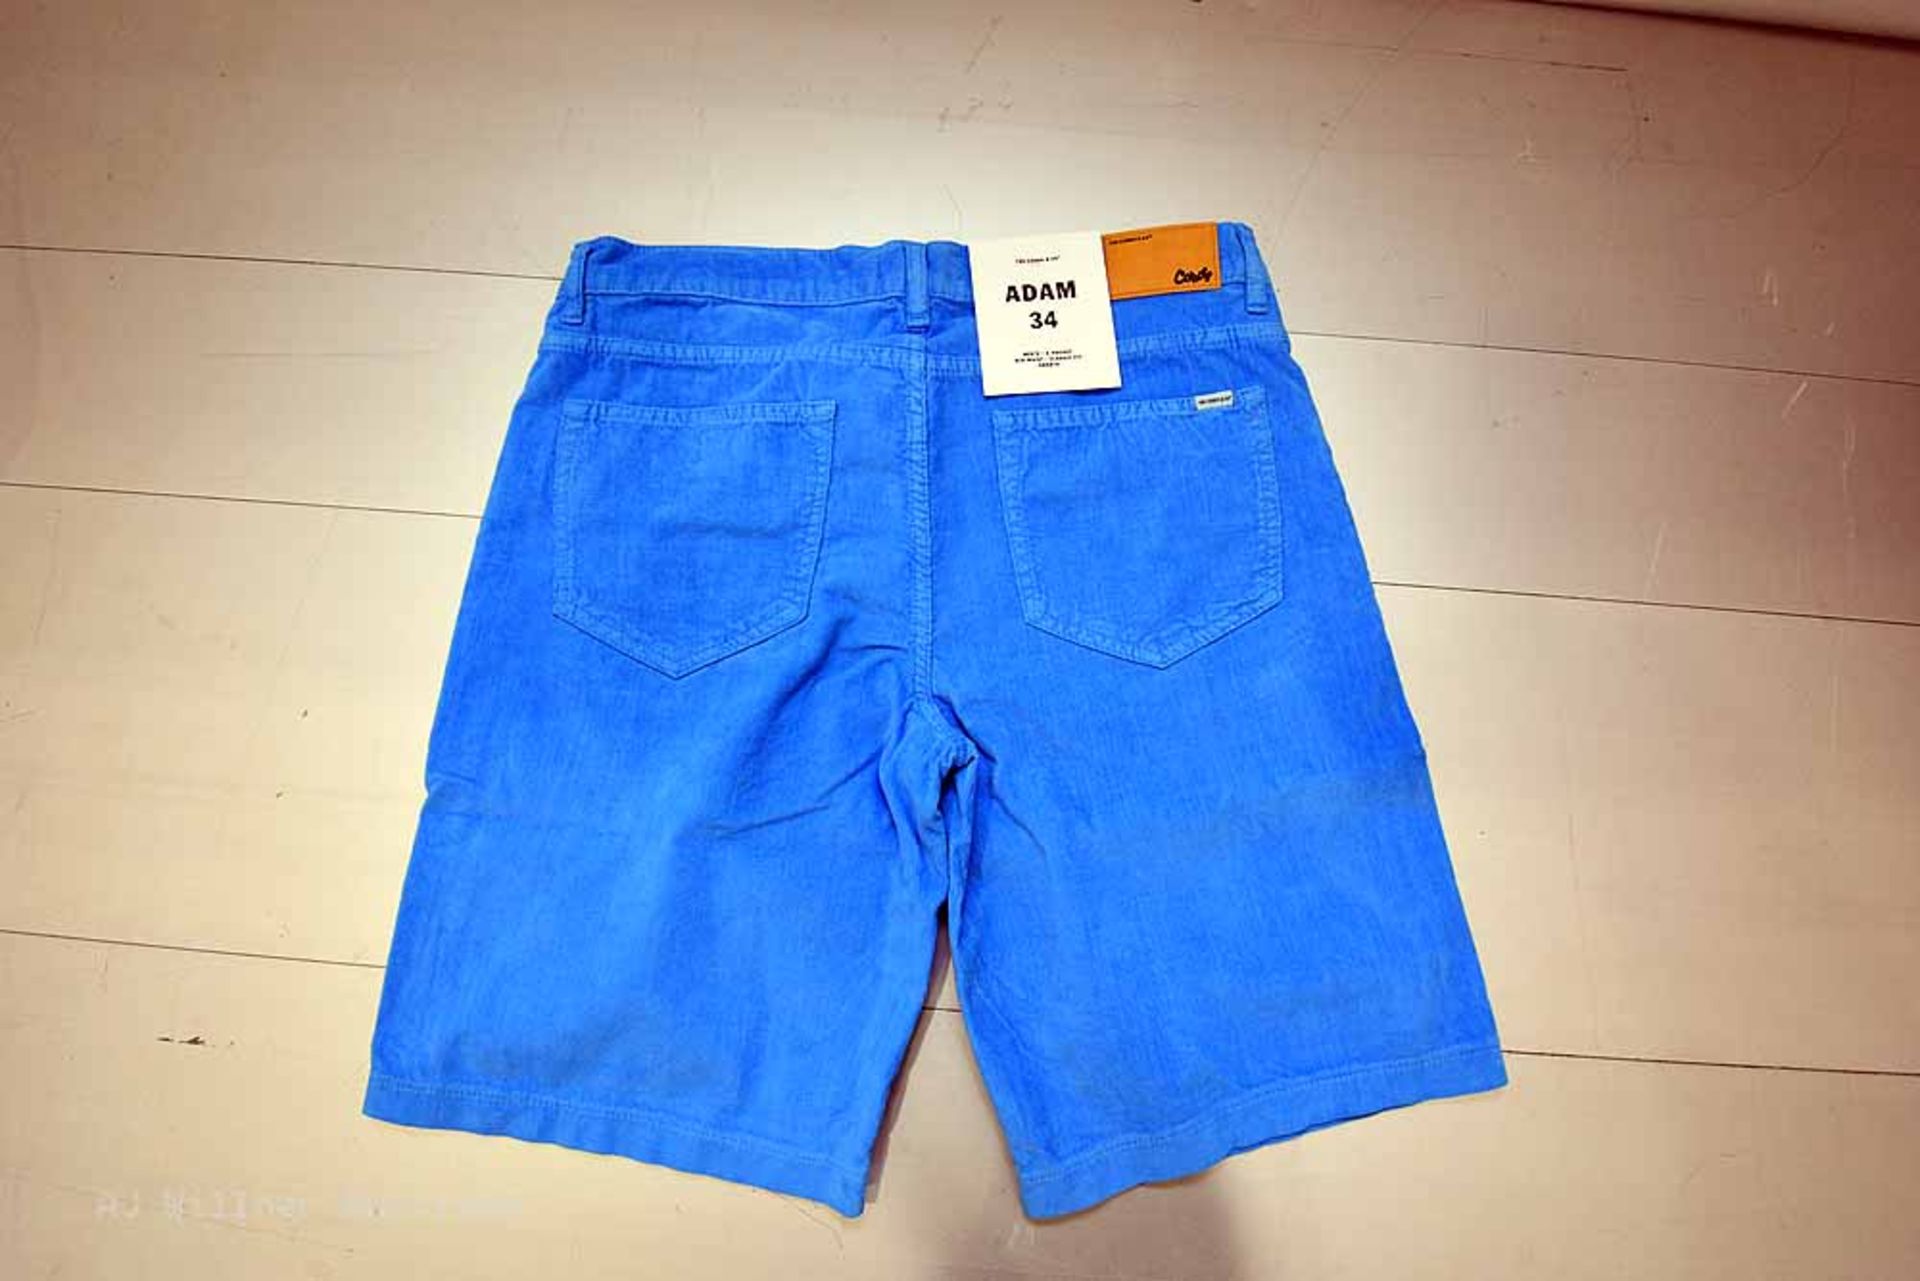 The Cords & Co. "Adam" Style, Men's 5-Pocket Mid-Waist/Classic Fit Shorts,Azure/Silver/Turq/Indigo - Image 6 of 10